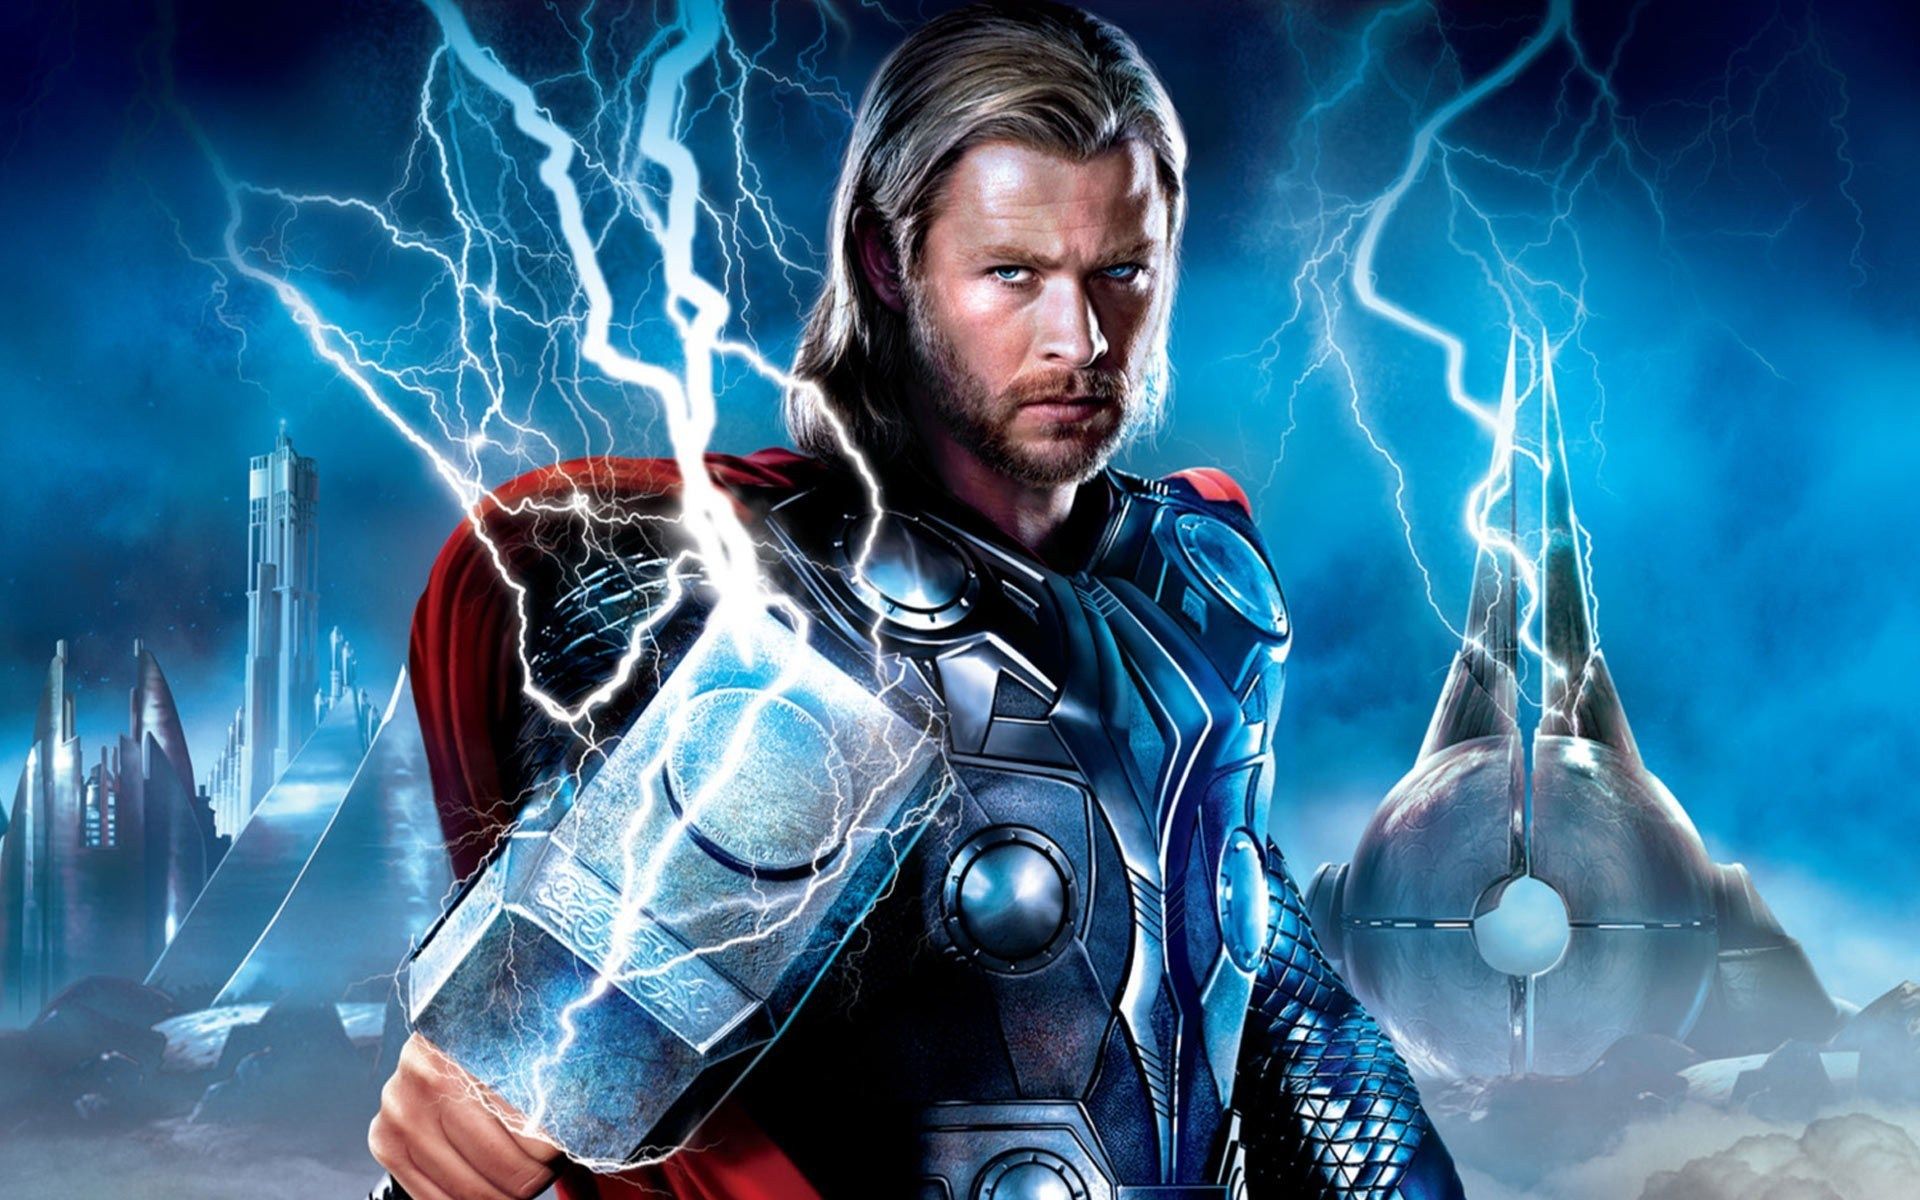 Things You Need to Know About Thor: Ragnarok